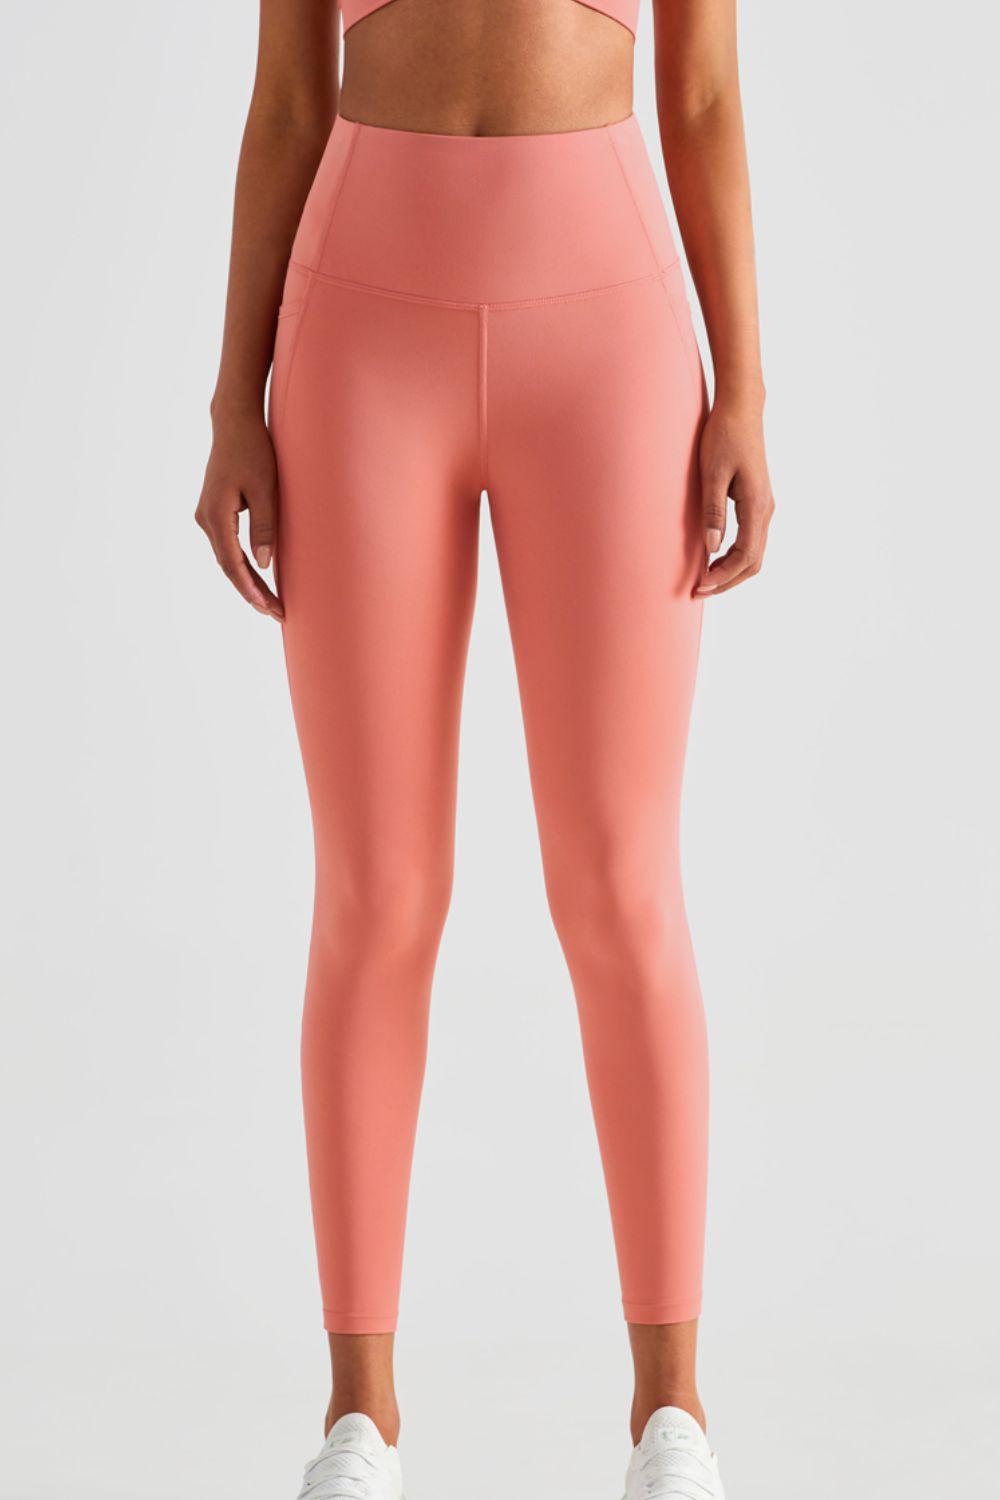 Wide Waistband Sports Leggings with Pockets-BOTTOM SIZES SMALL MEDIUM LARGE-[Adult]-[Female]-Coral-4-2022 Online Blue Zone Planet